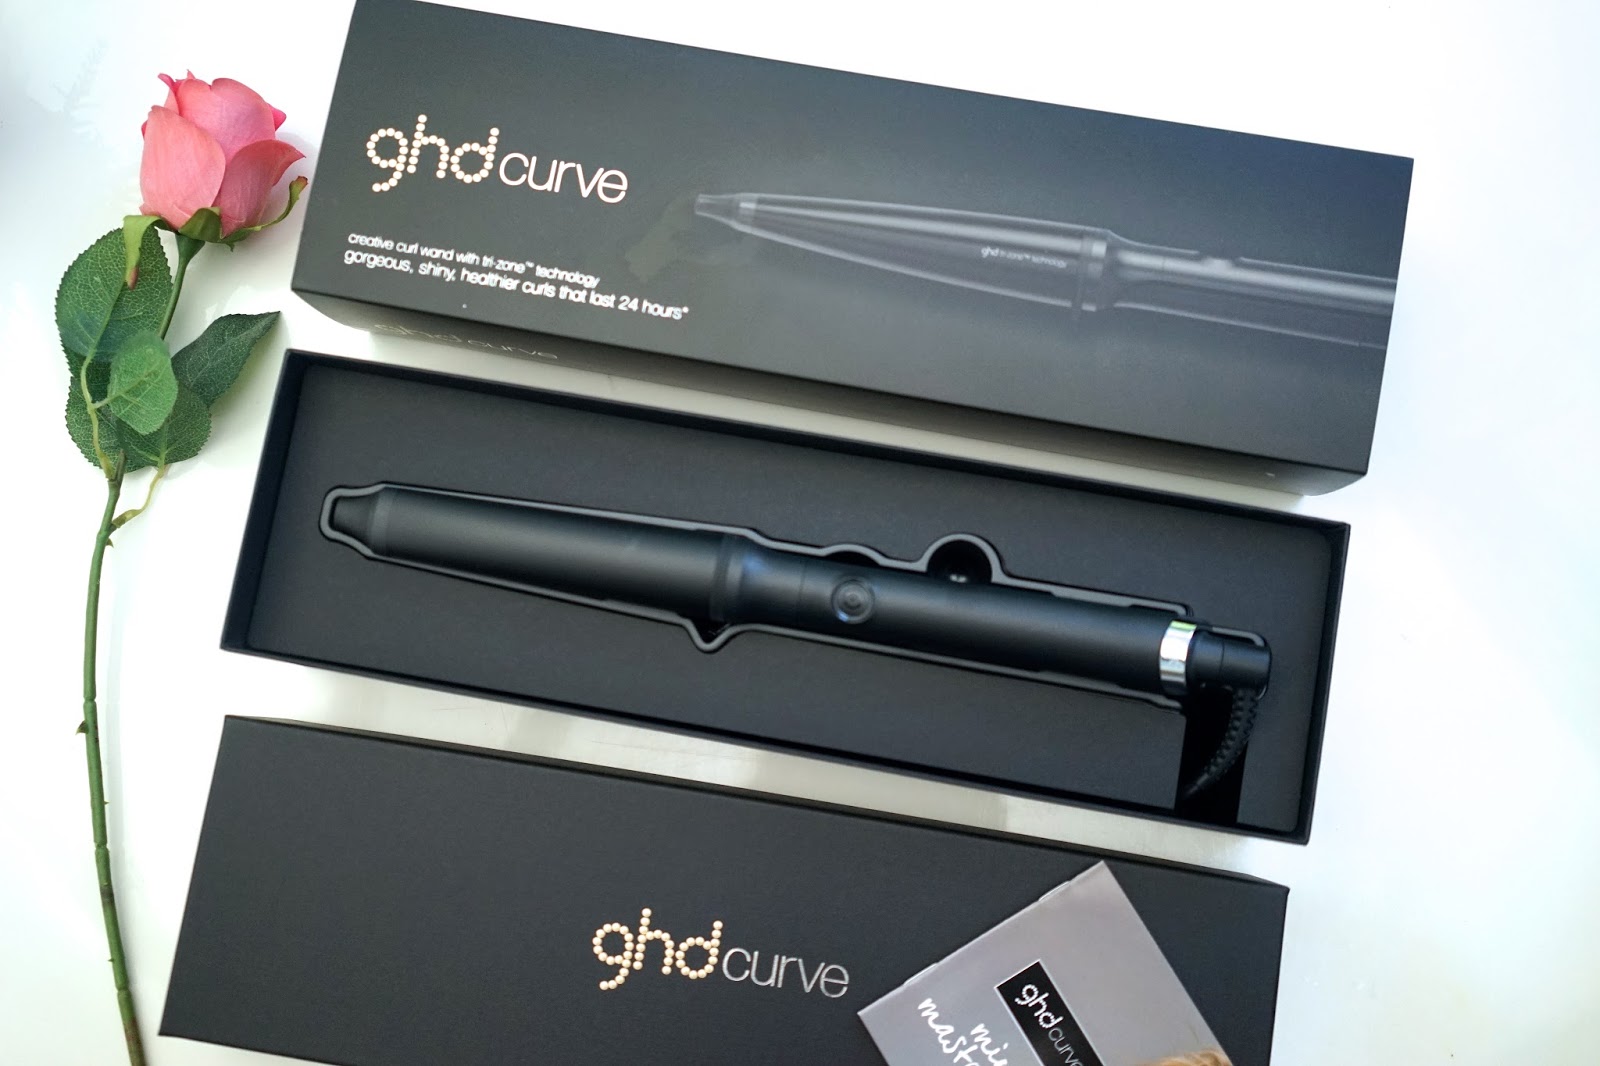 ghd curve review